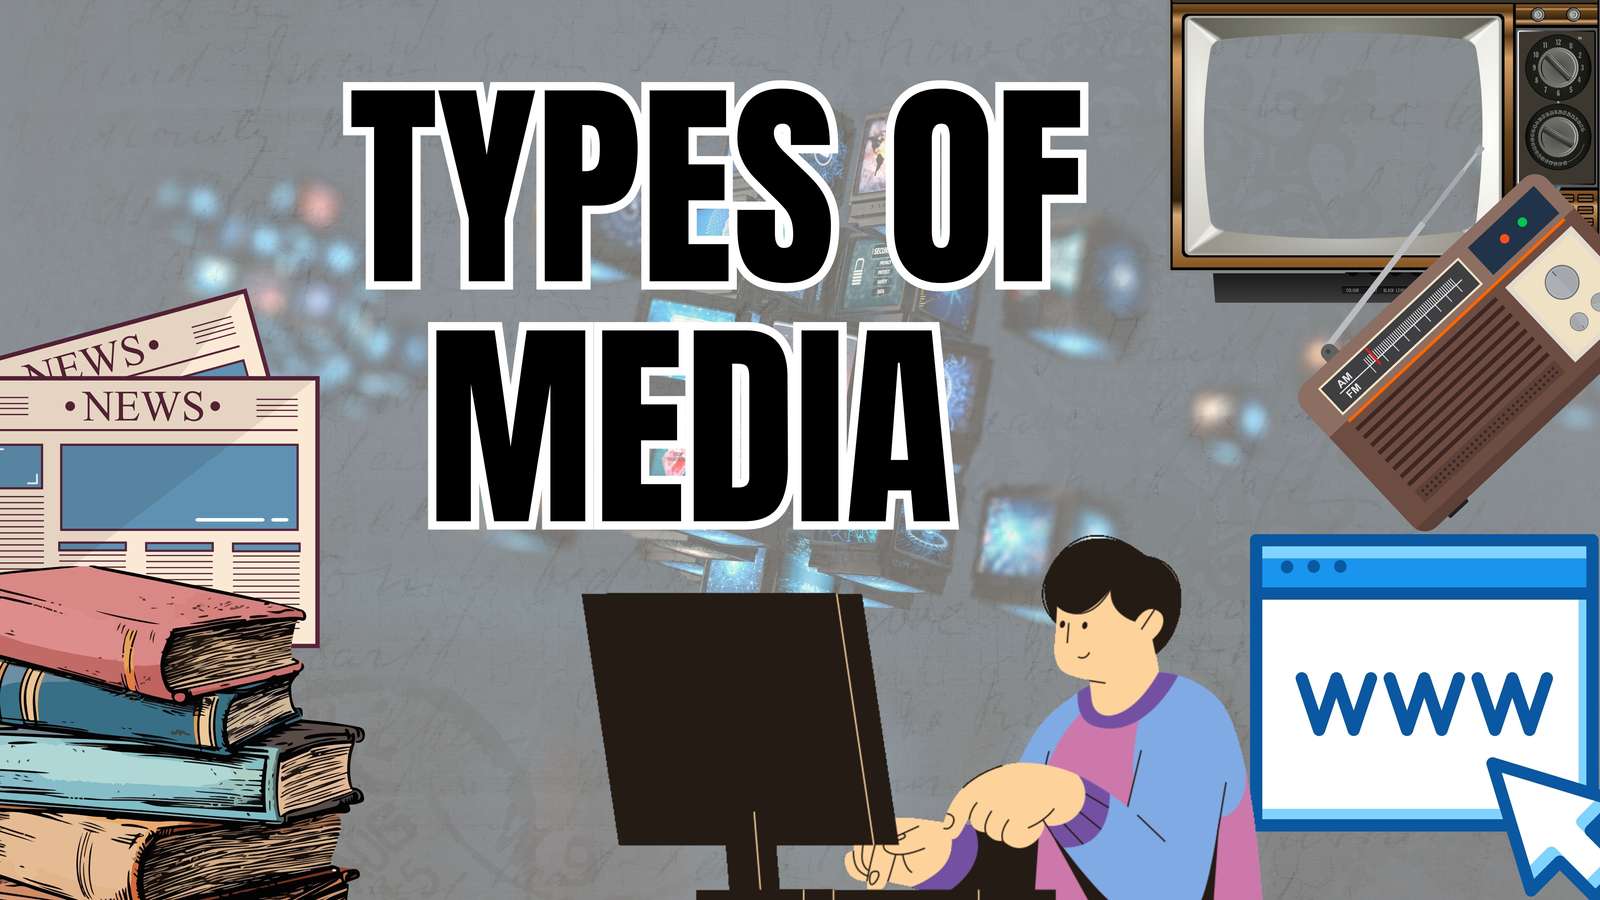 TYPES OF MEDIA online puzzle